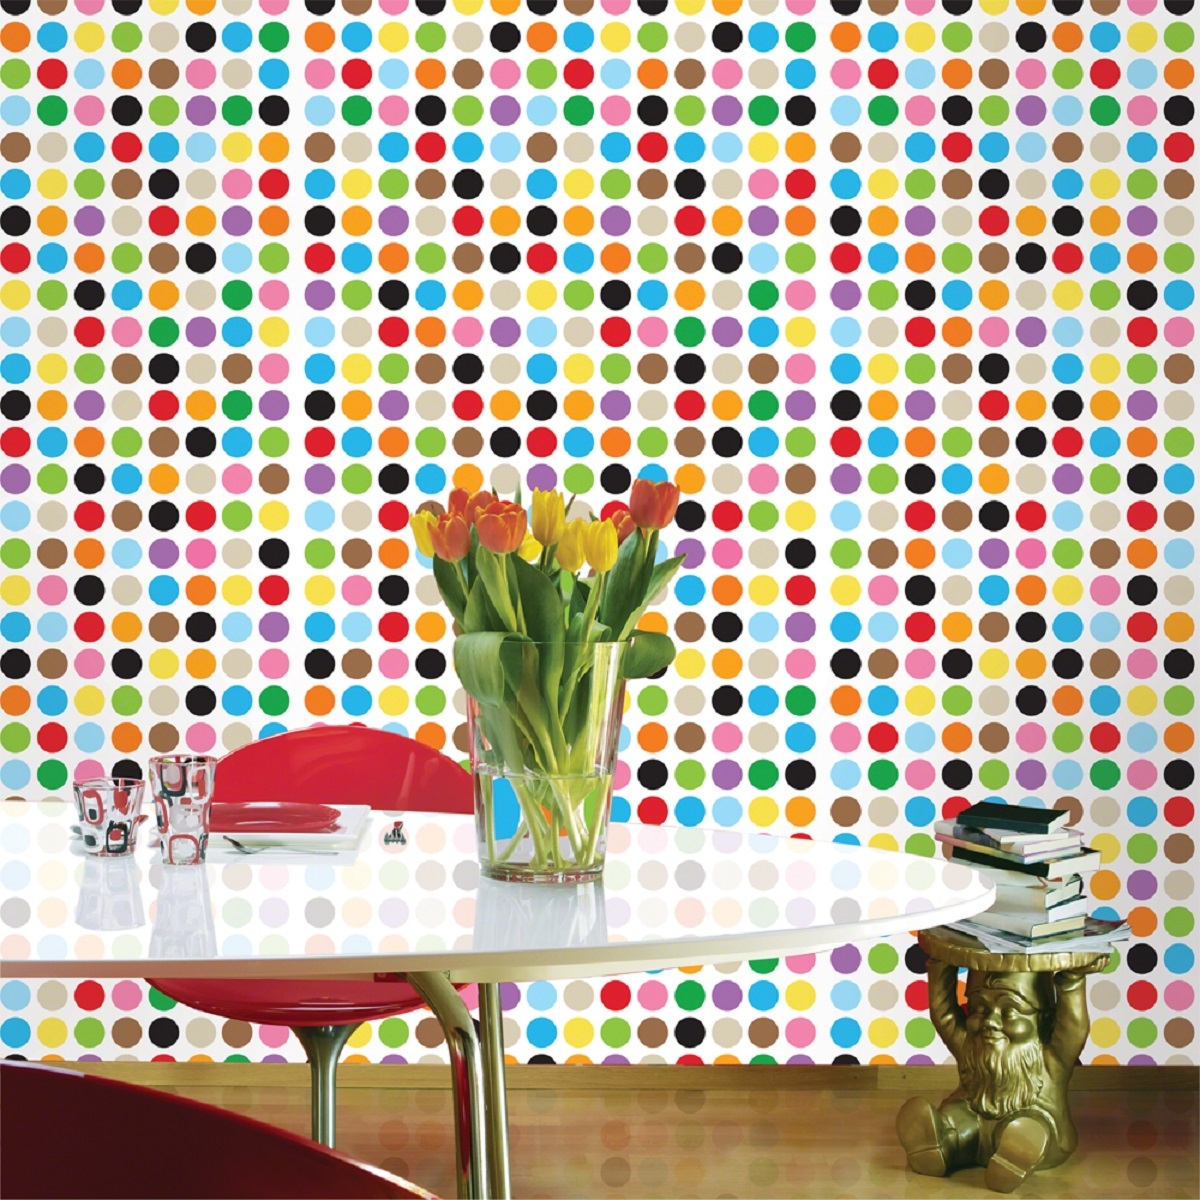 Colorful Pola Dot Patterned Peel And Stick Removable - Dots In Interior Design - HD Wallpaper 